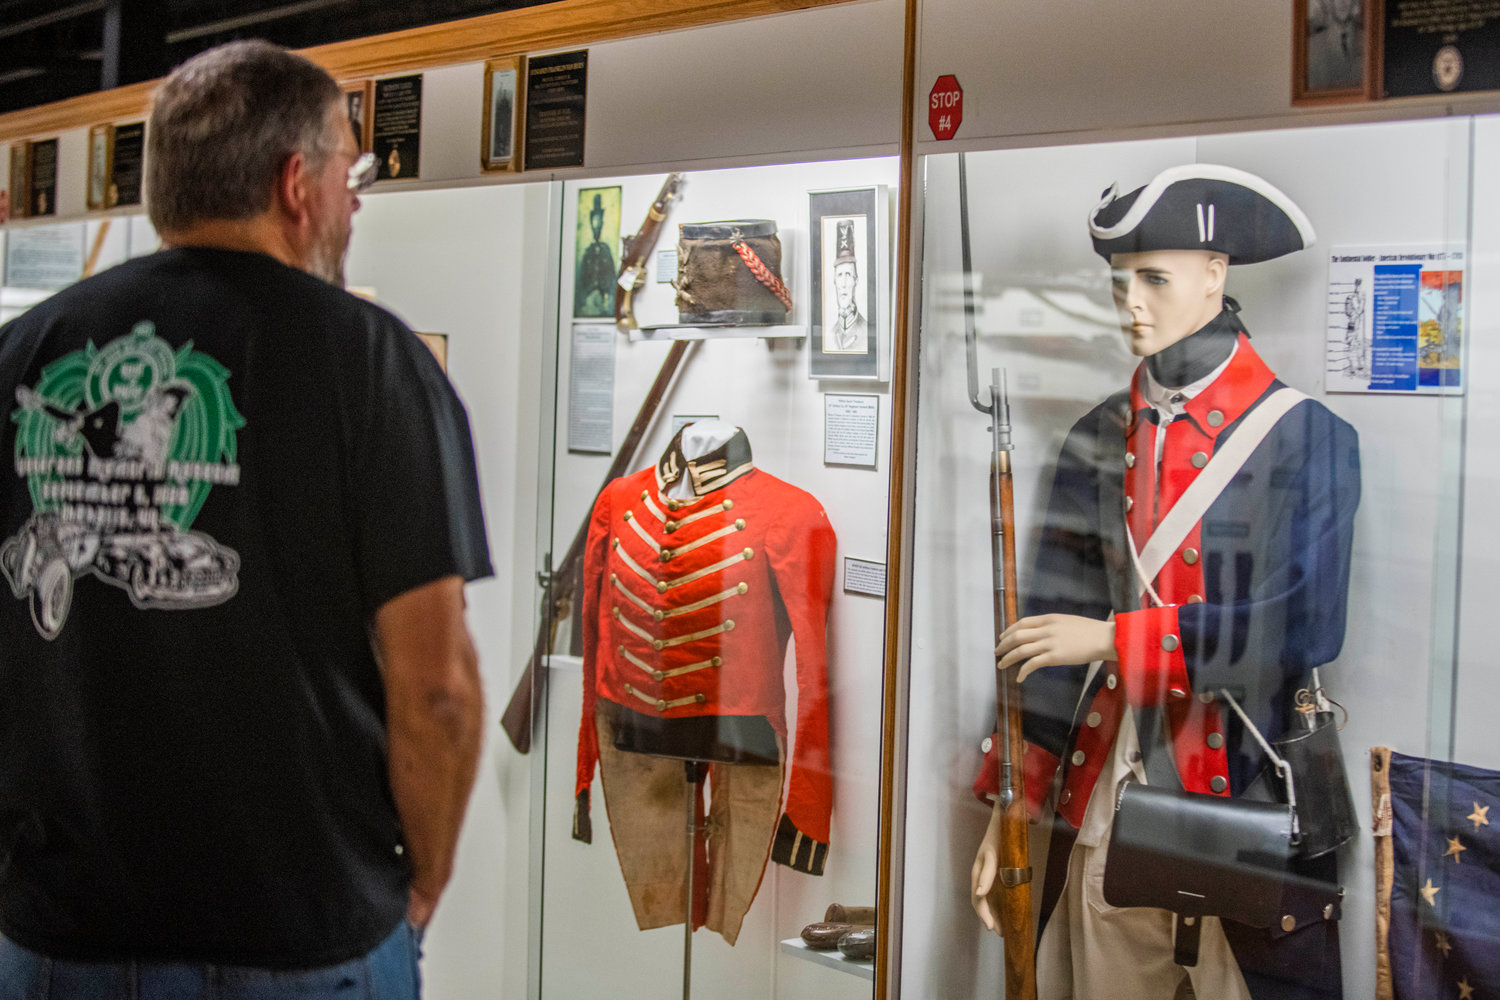 FILE PHOTO — Museum Director Chip Duncan looks to Revolutionary War attire on display at the Veterans Memorial Museum in Chehalis.